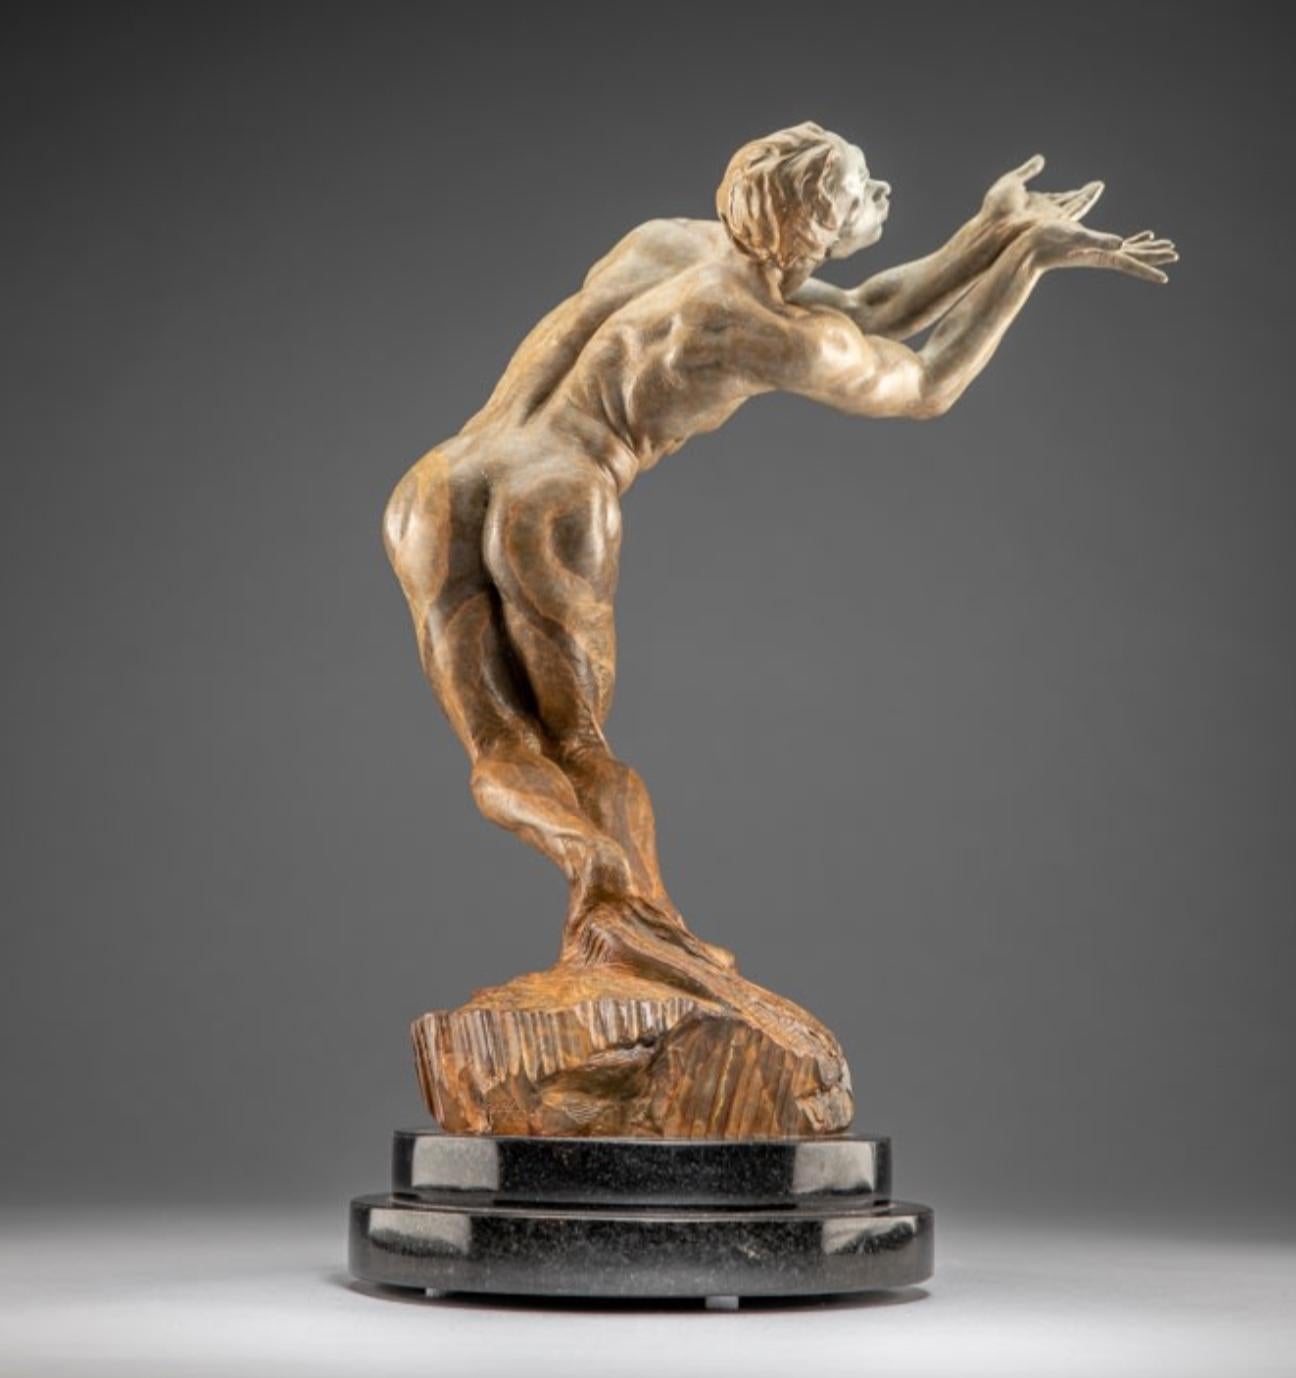 In Butterfly, Atelier the gesture has a powerful, yet sensitive, conviction of universality, which places it amongst Richard MacDonald’s most distinctive and original works of art. The Baroque spiral of the body and constant motion rises out of